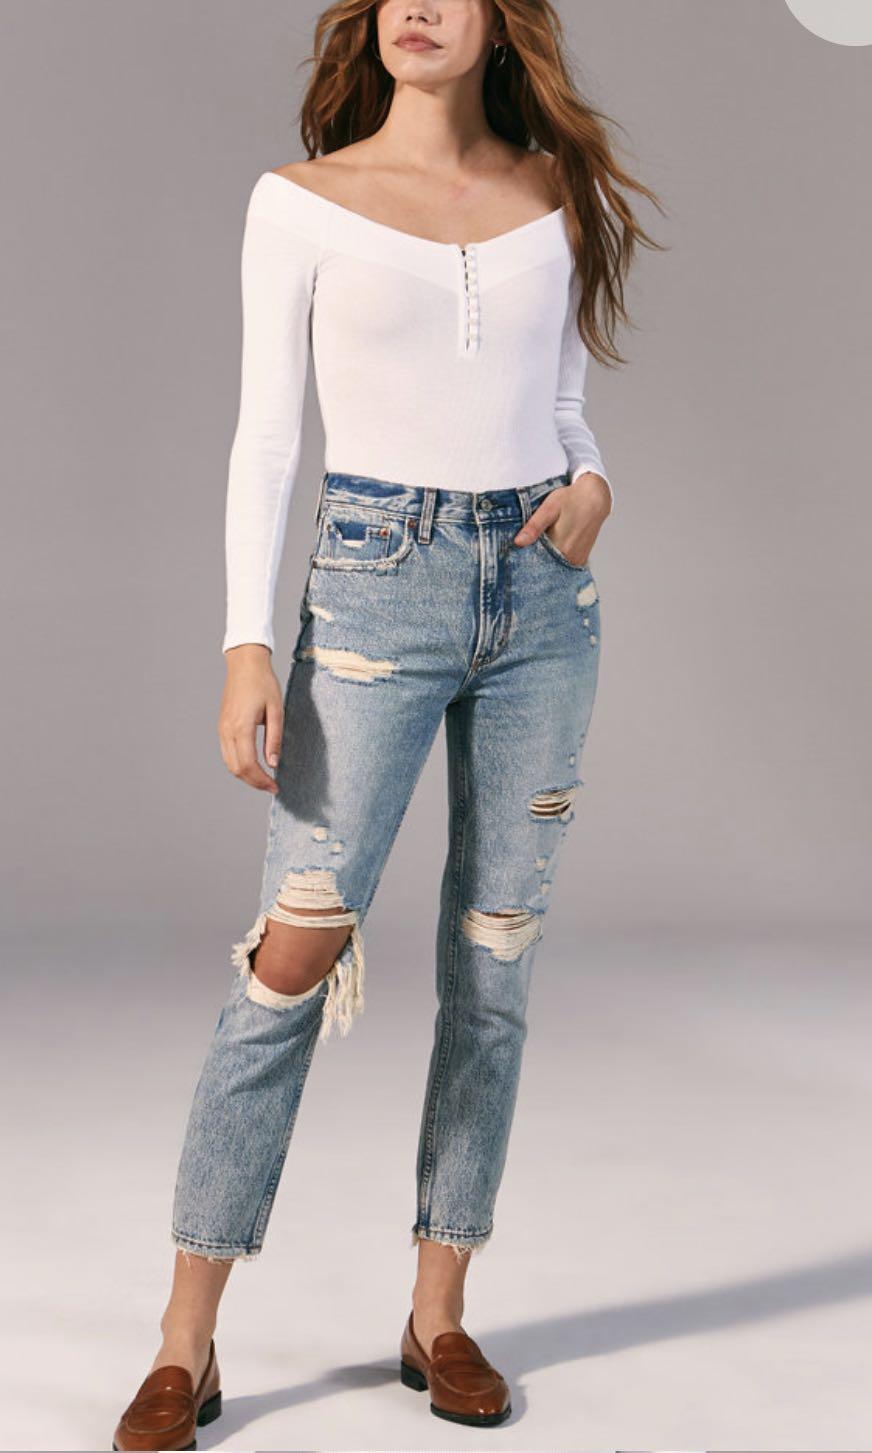 abercrombie & fitch high rise jeans